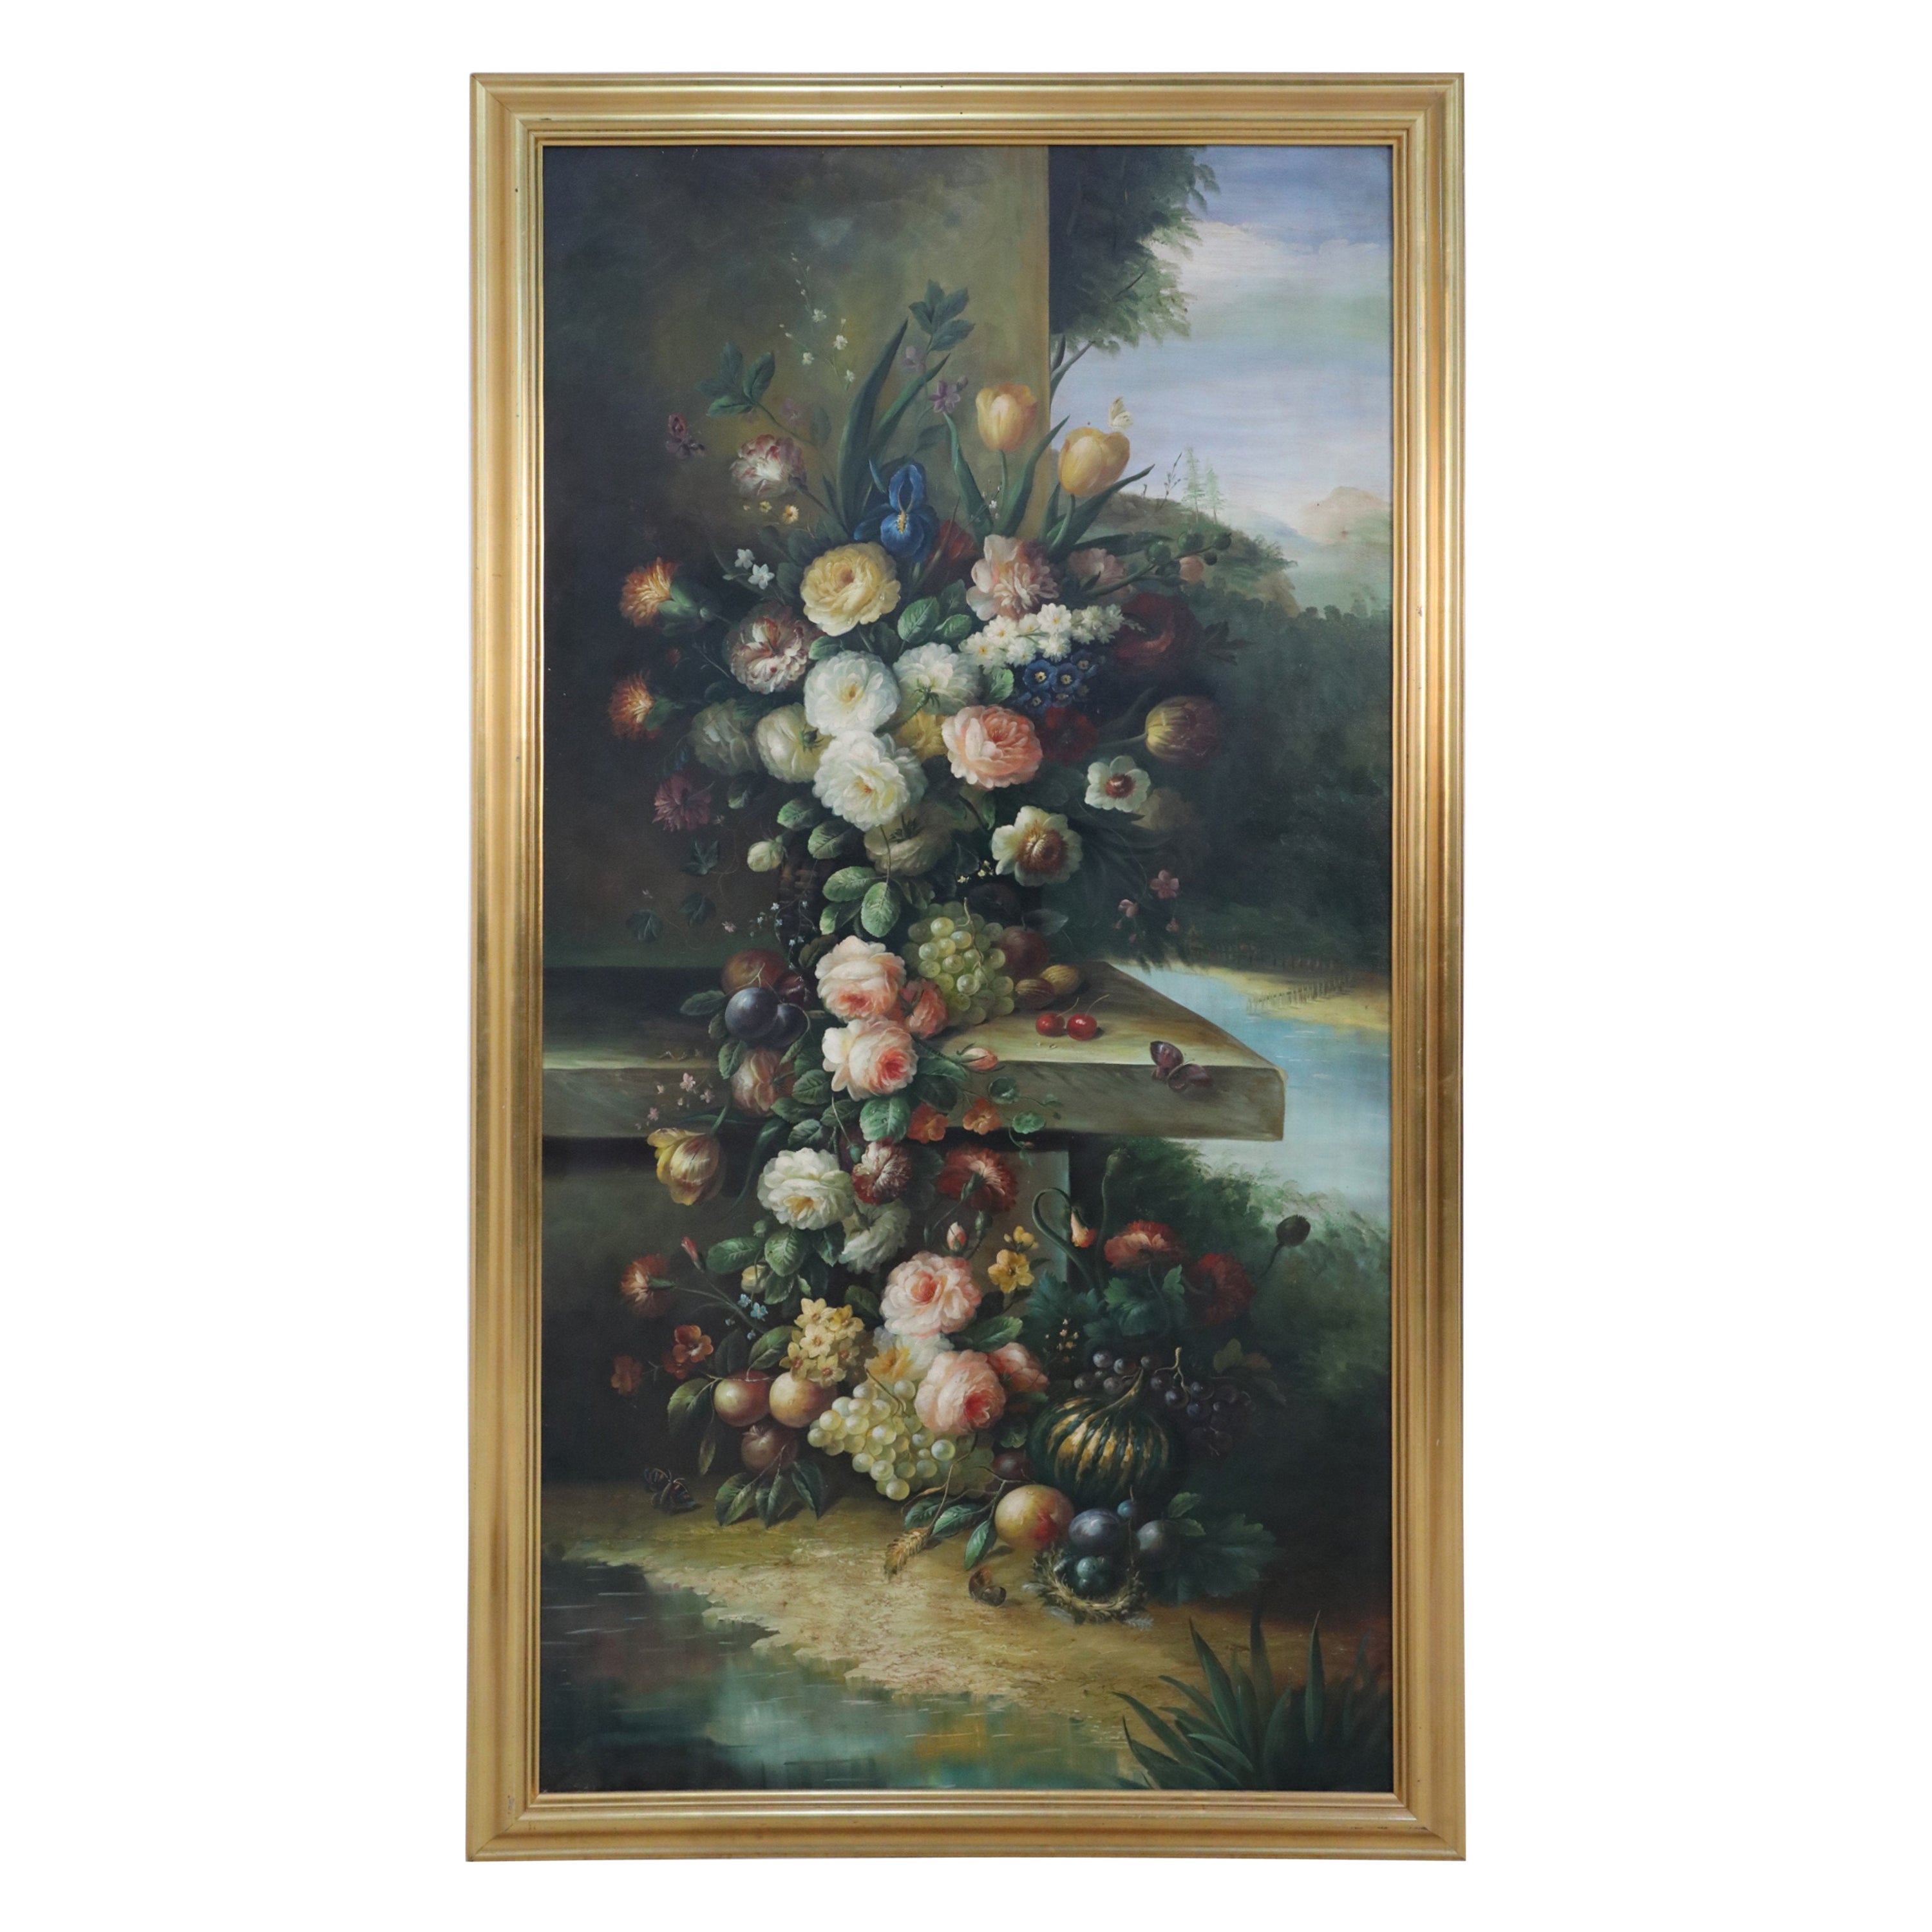 Large Framed Still Life Oil Painting of an Urn of Flowers on a Garden Bench